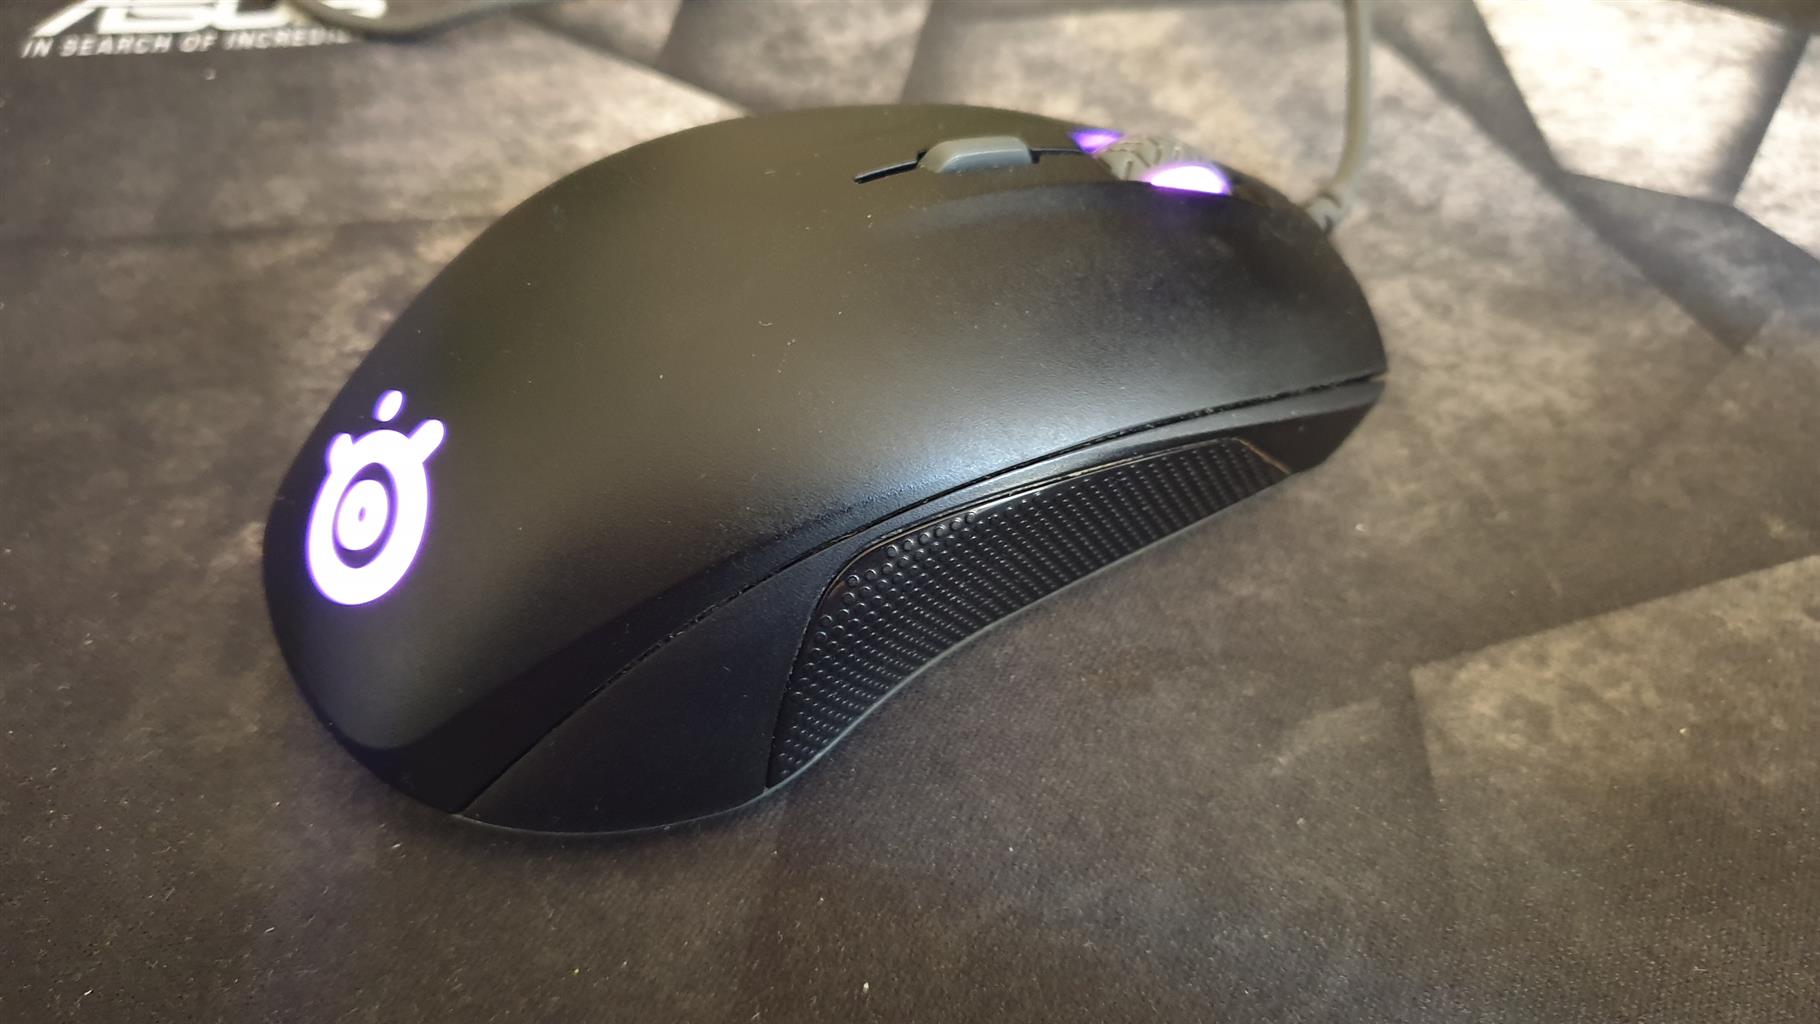 Steelseries Rival 110 gaming mouse